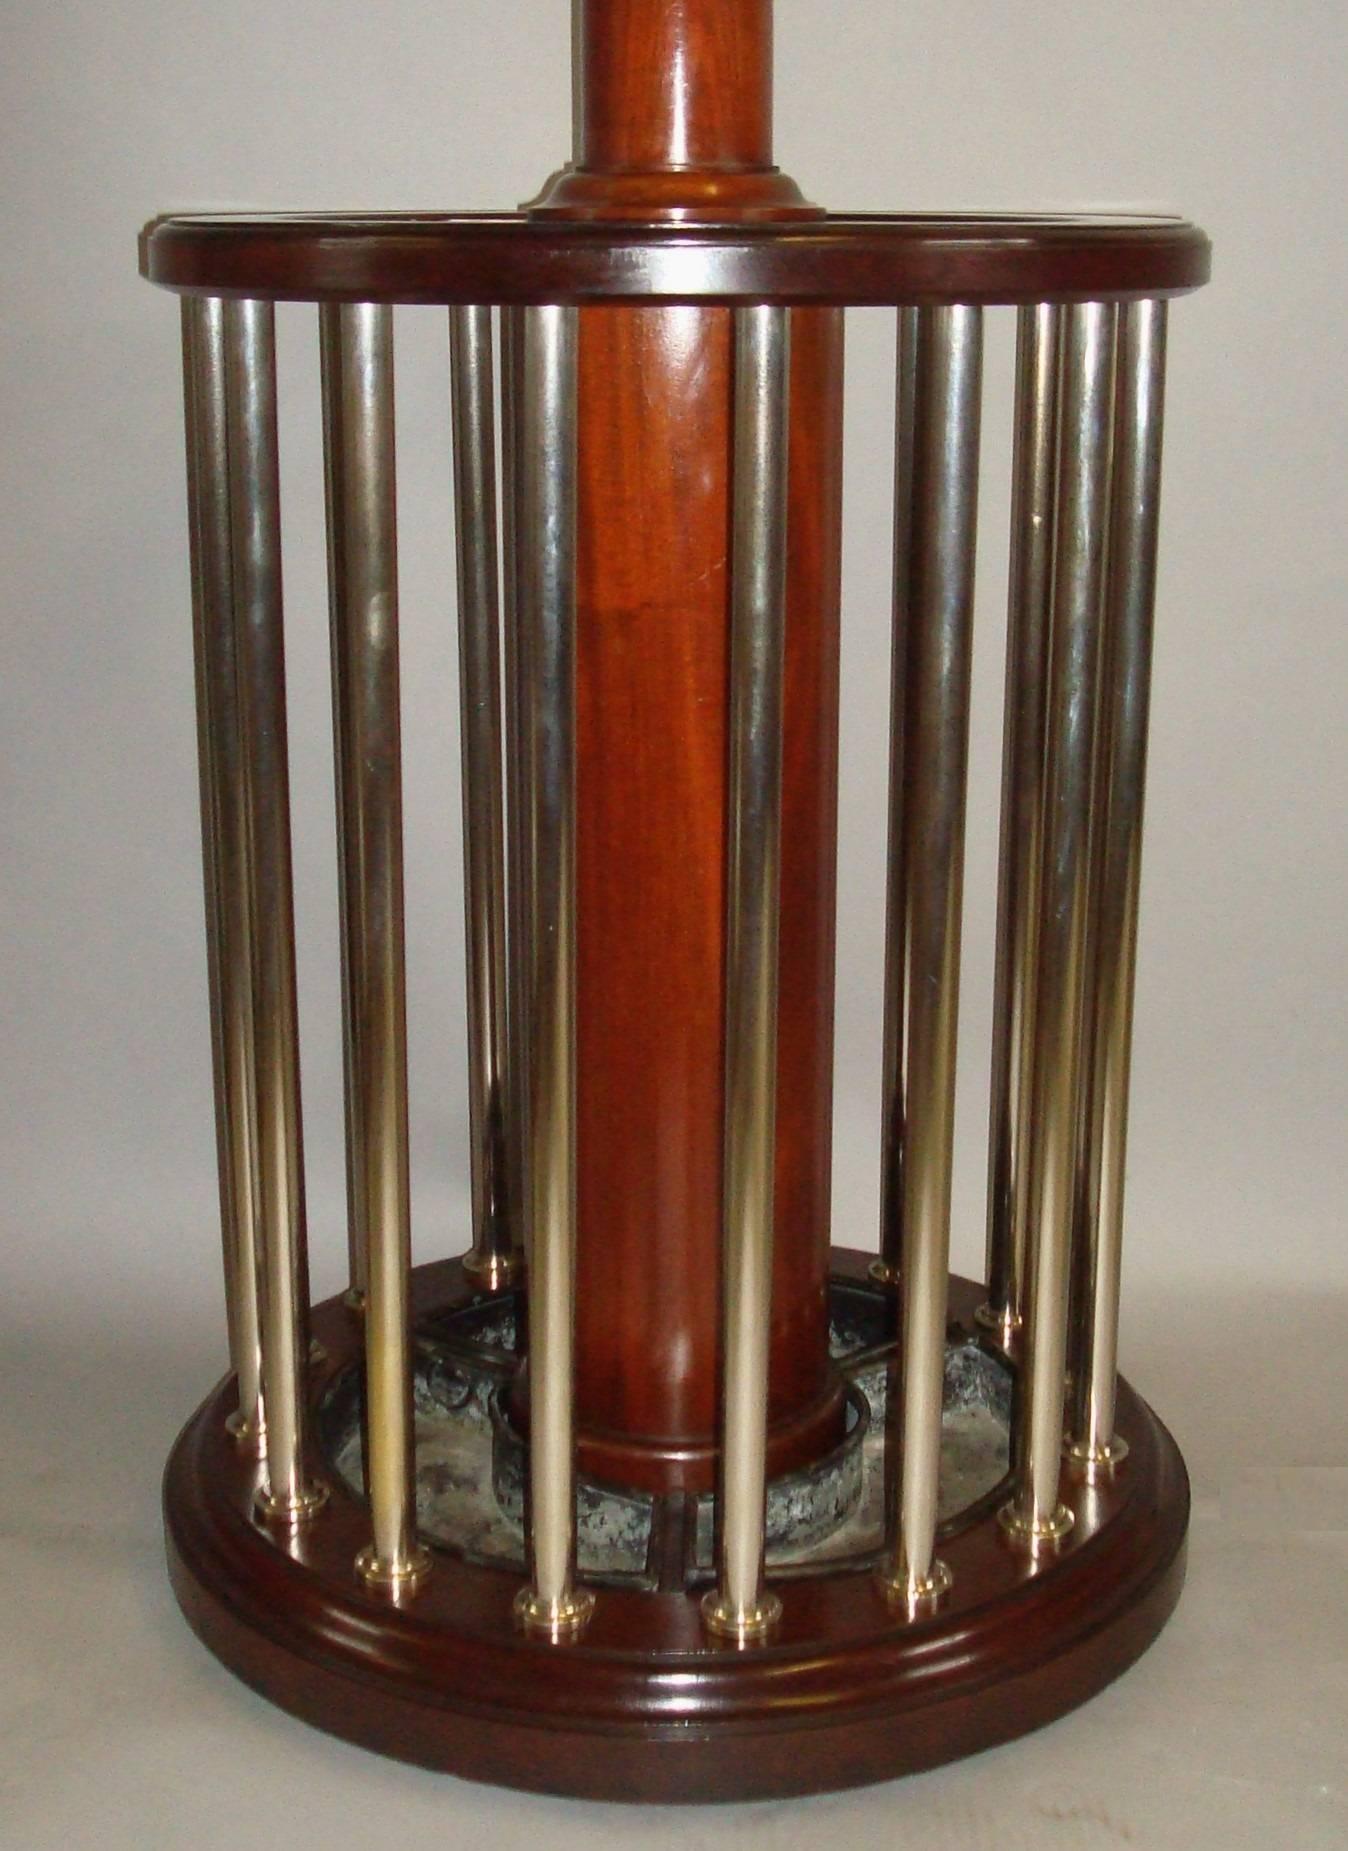 Early 20th Century Mahogany and Chrome Circular Hall Stand In Excellent Condition For Sale In Moreton-in-Marsh, Gloucestershire